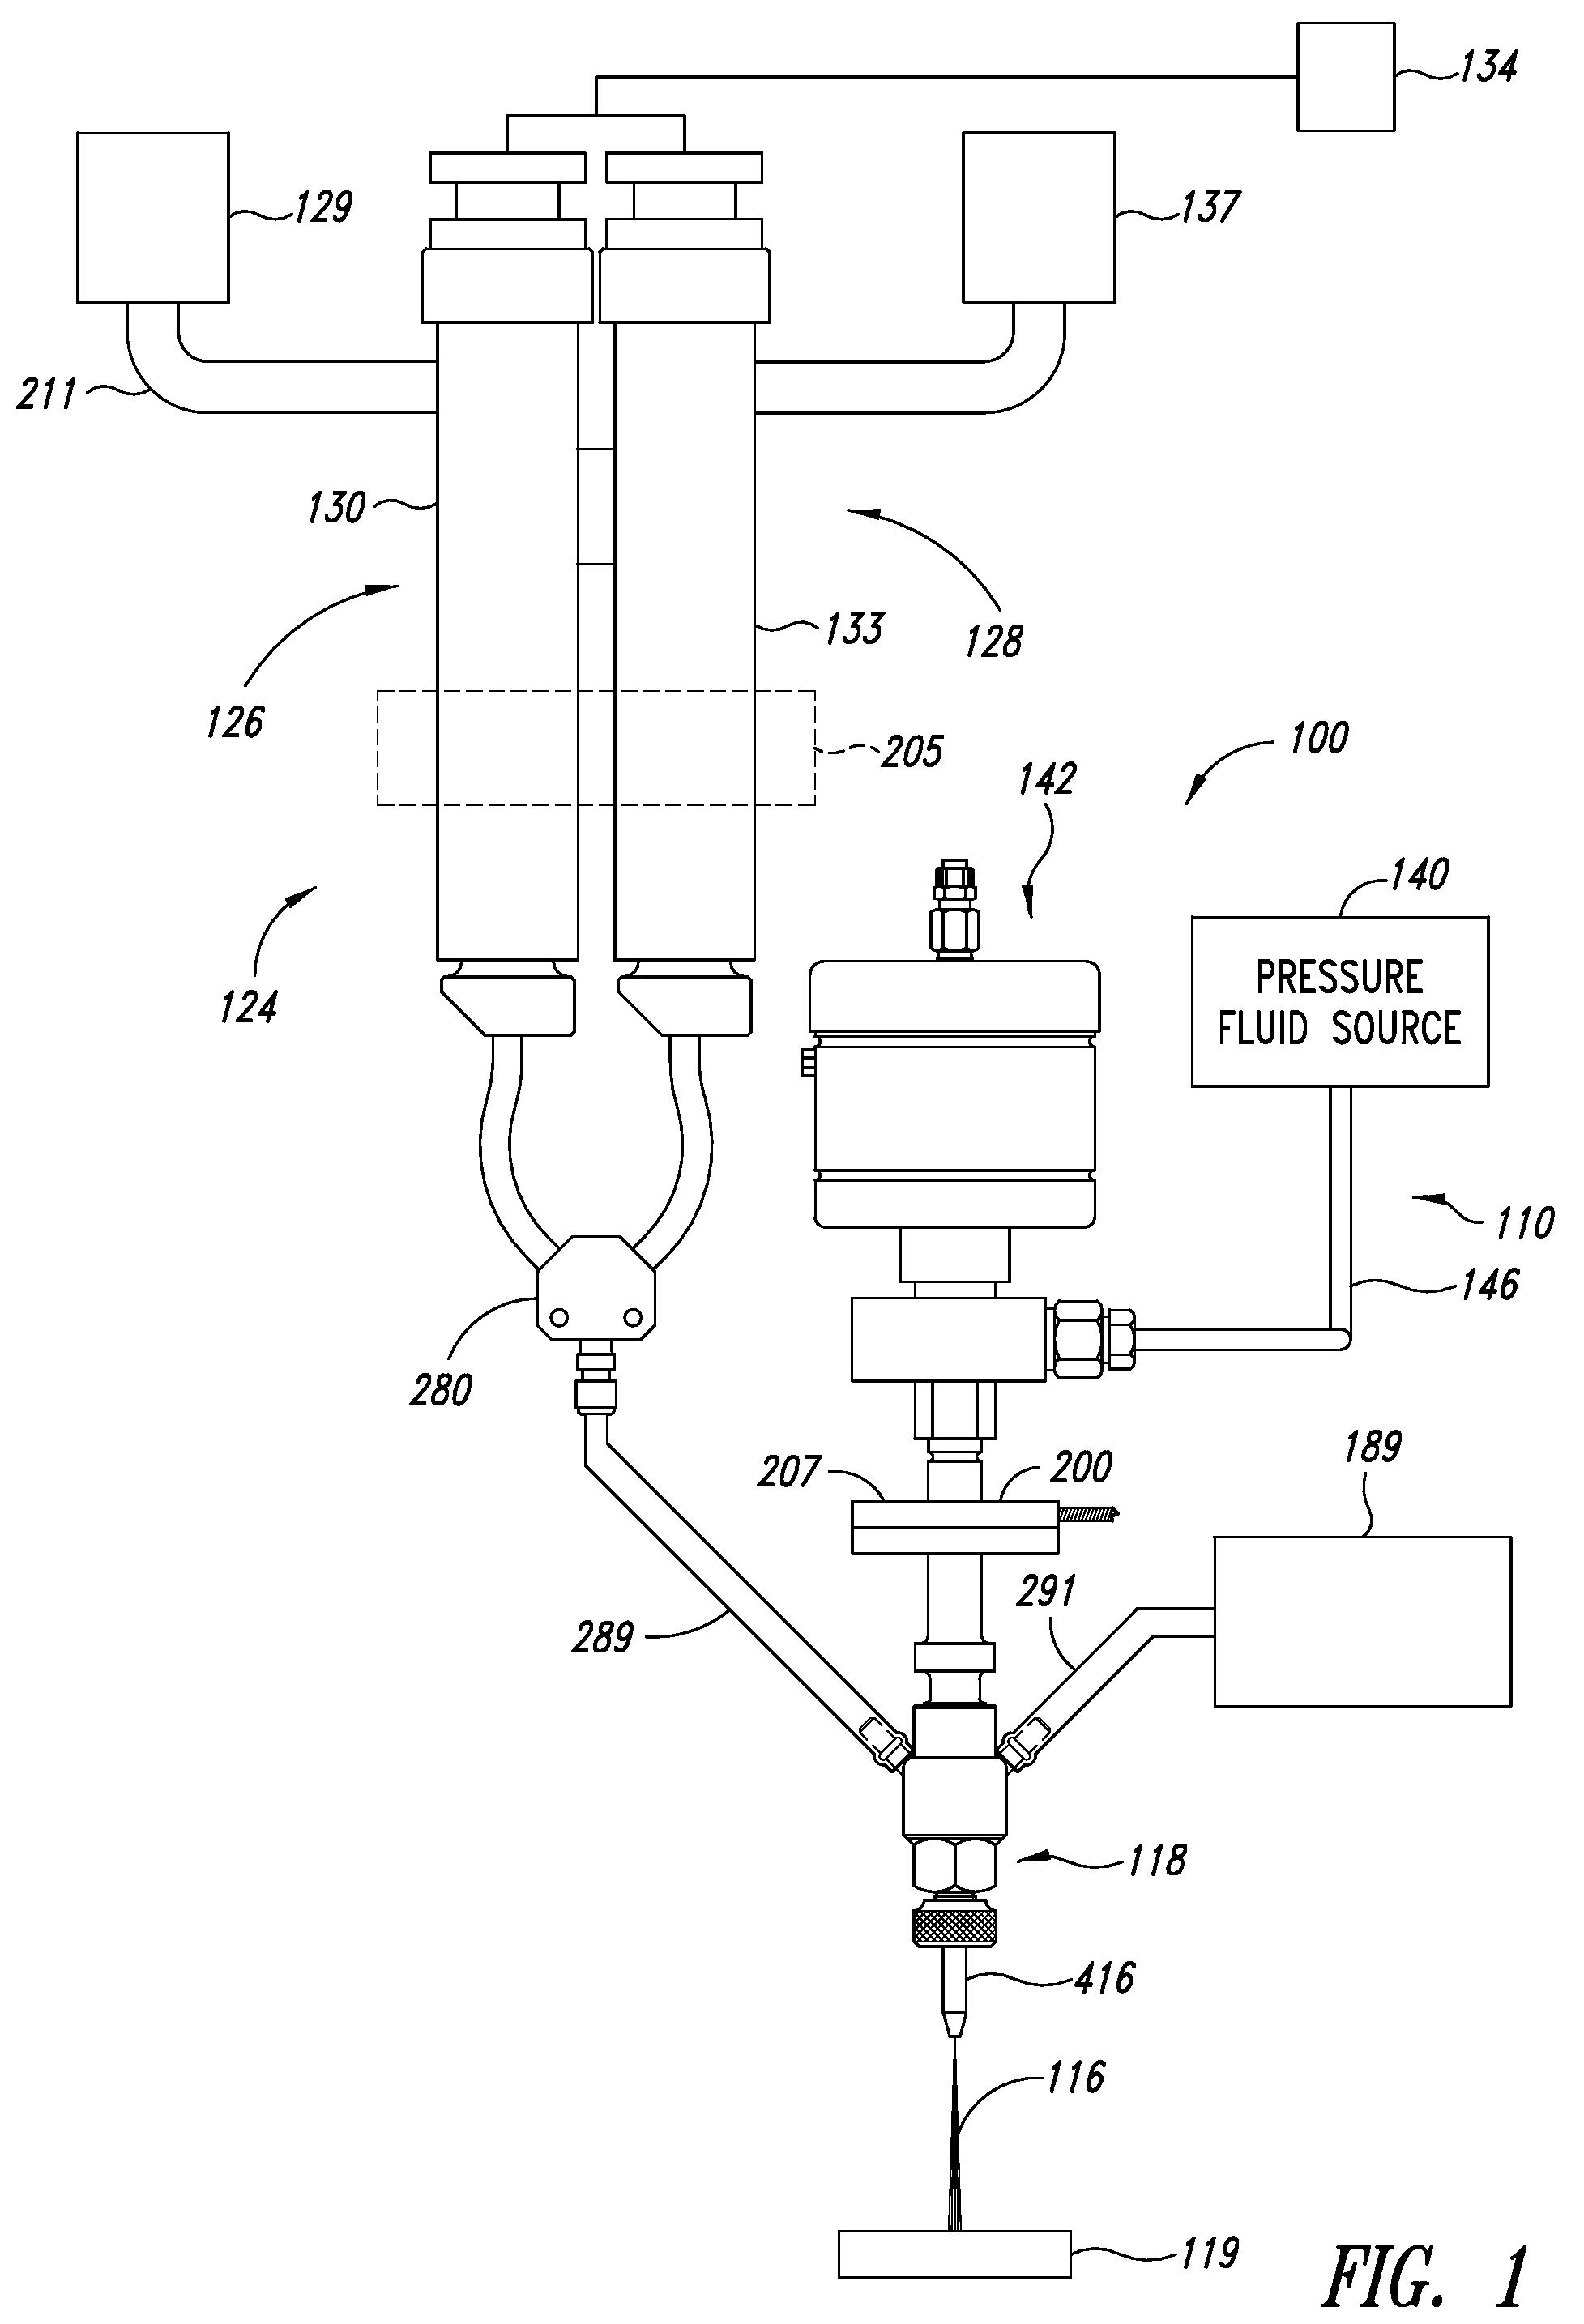 Processes and apparatuses for enhanced cutting using blends of abrasive materials